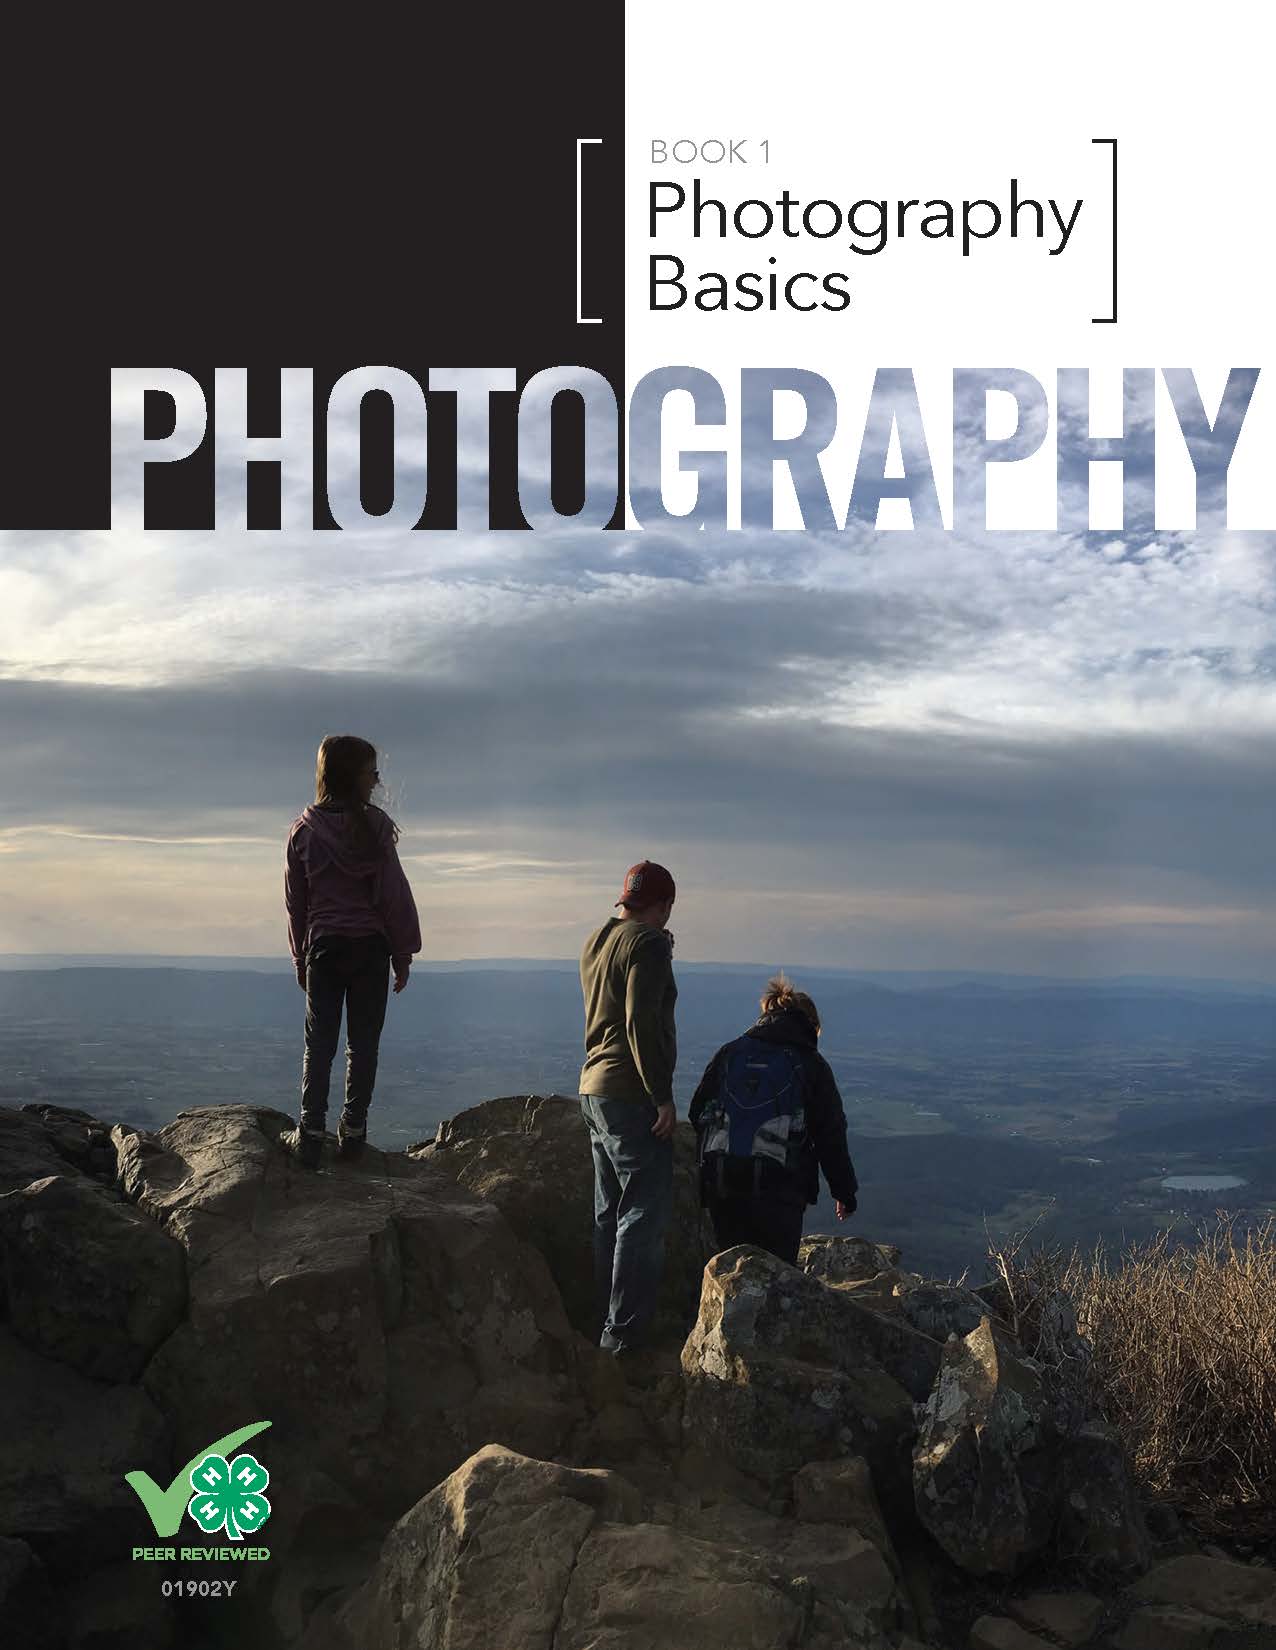 A 4-H photography book cover